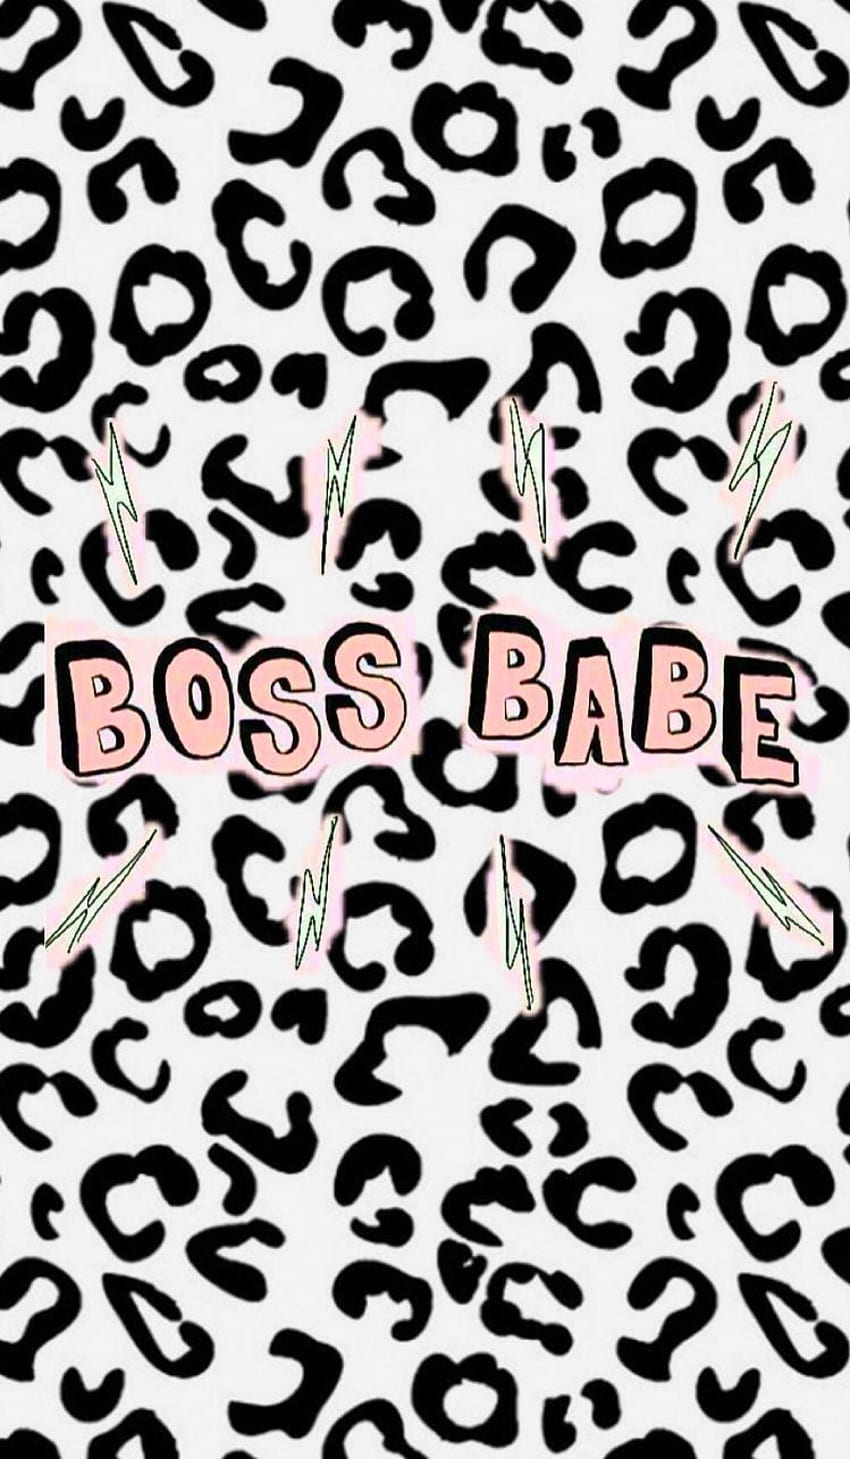 Top more than 60 boss babe wallpaper - in.cdgdbentre